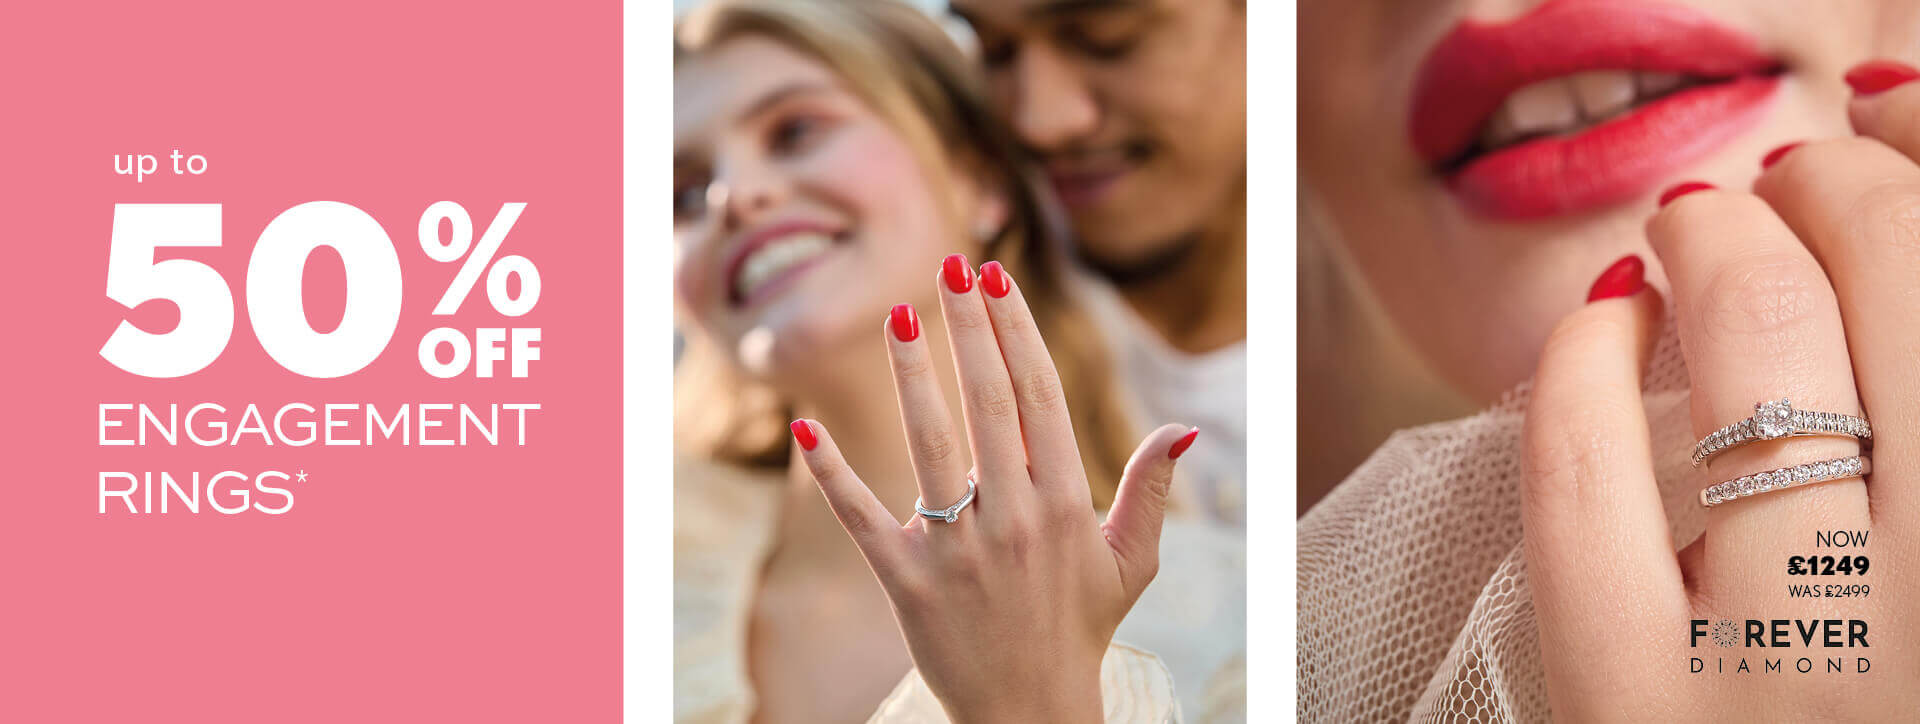 Up to 50% off engagement rings